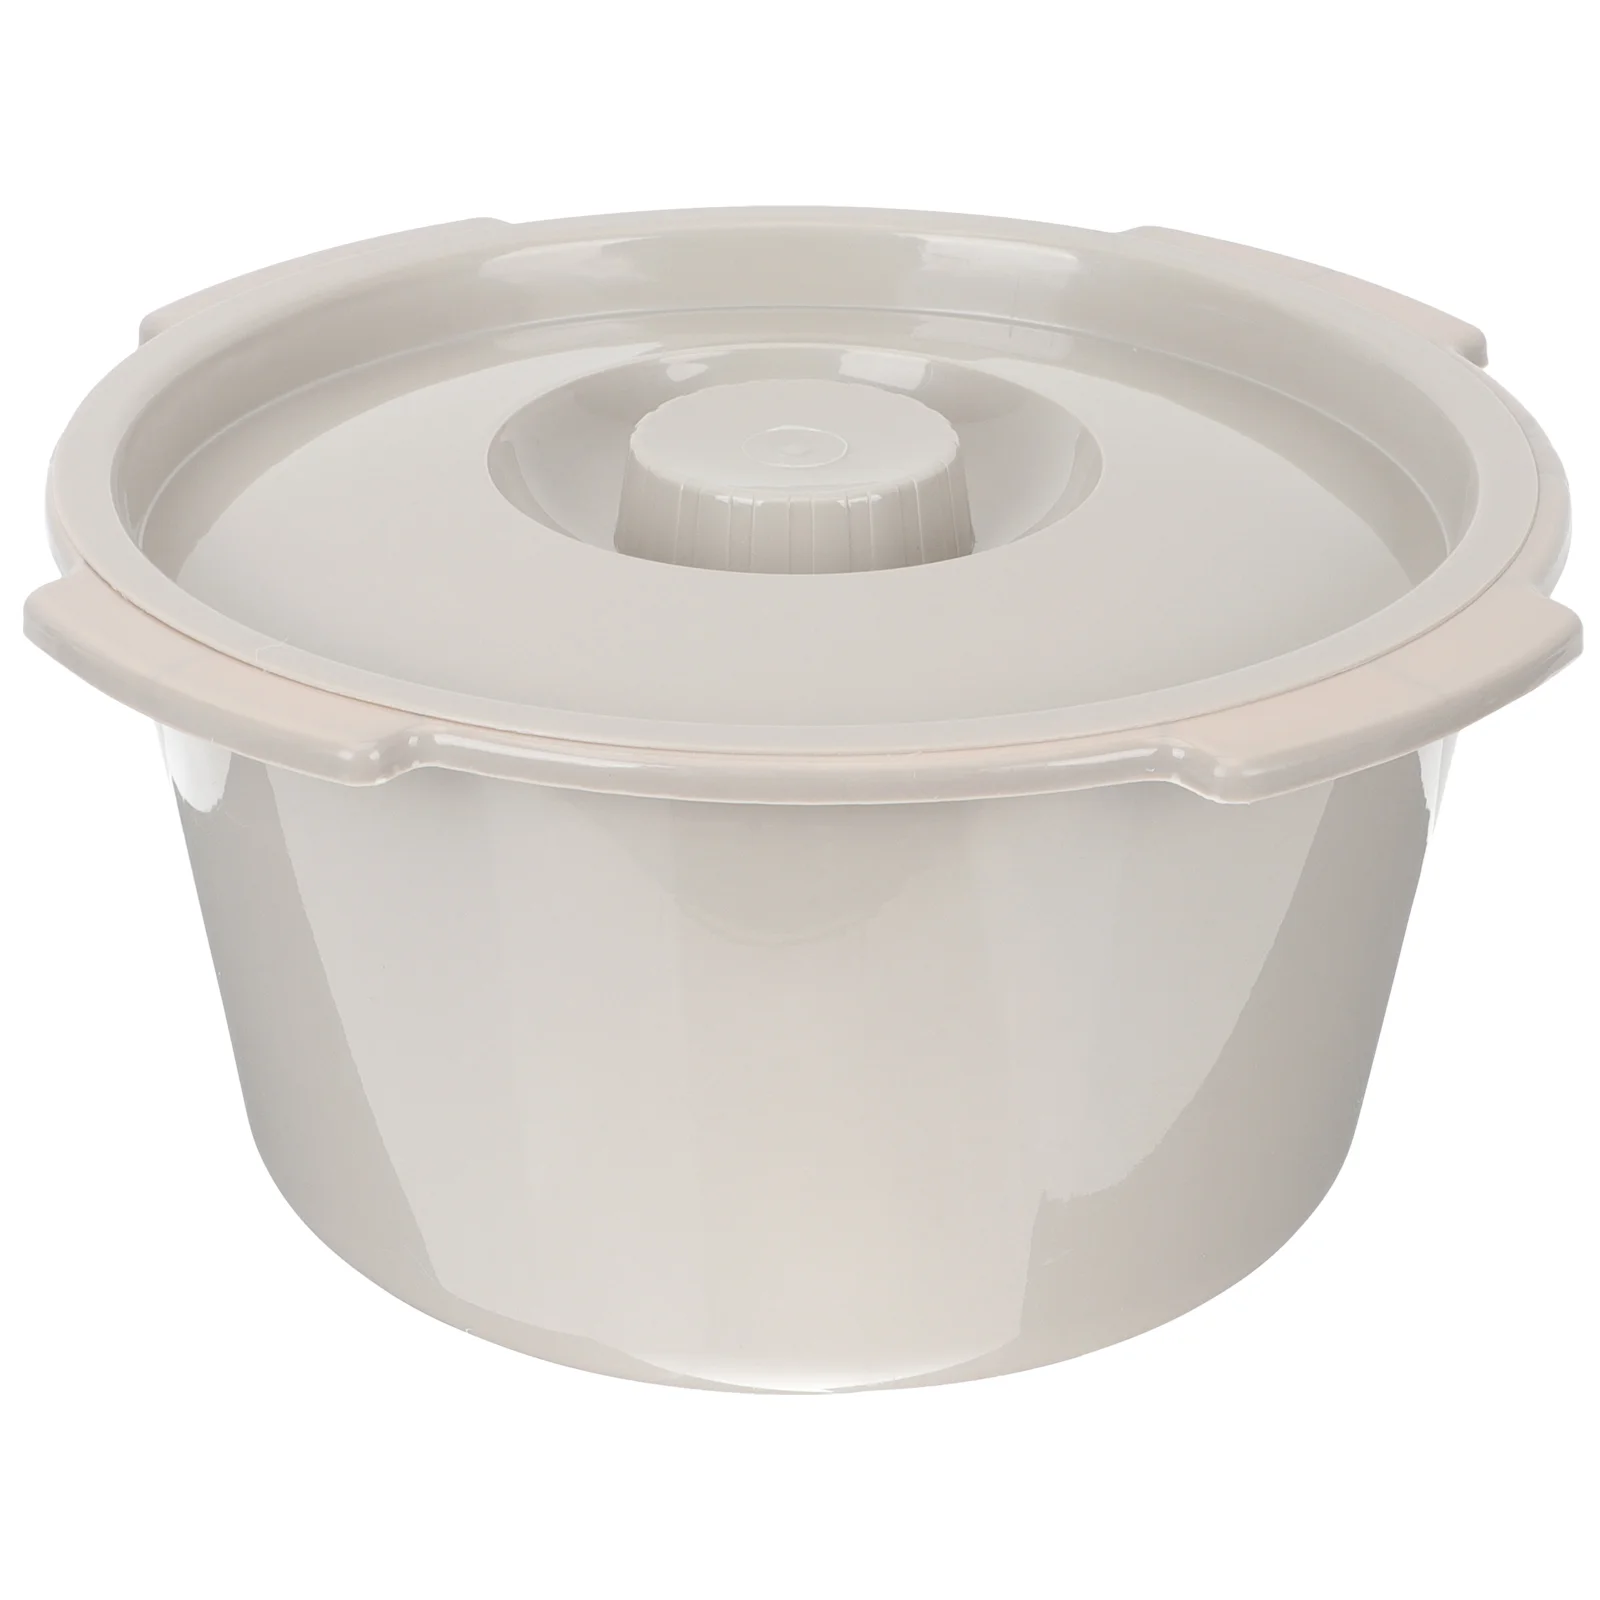 

Commode Chair Plastic Chamber Pot for Bedroom Portable Spittoon Kids Urine Elderly with Lid Travel Accessories